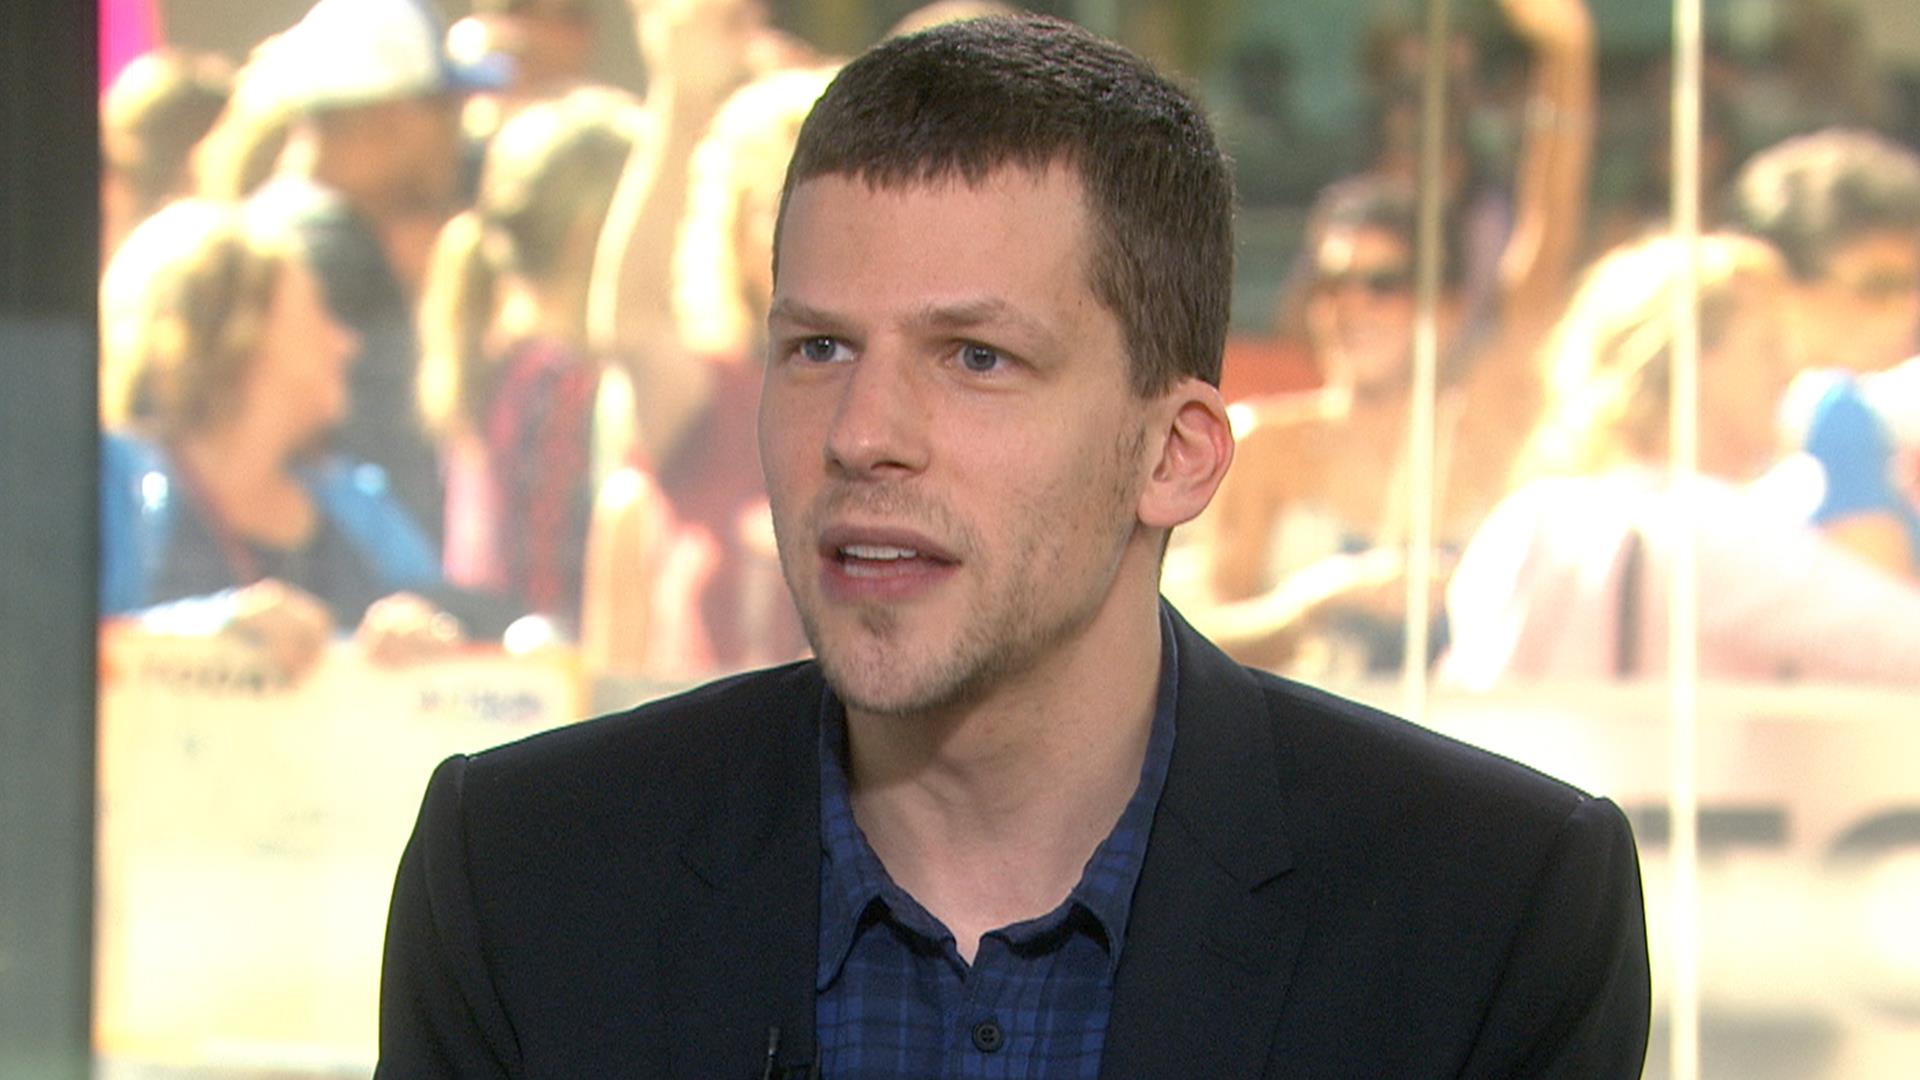 Now You See Me Star Jesse Eisenberg Brings Magic To Today